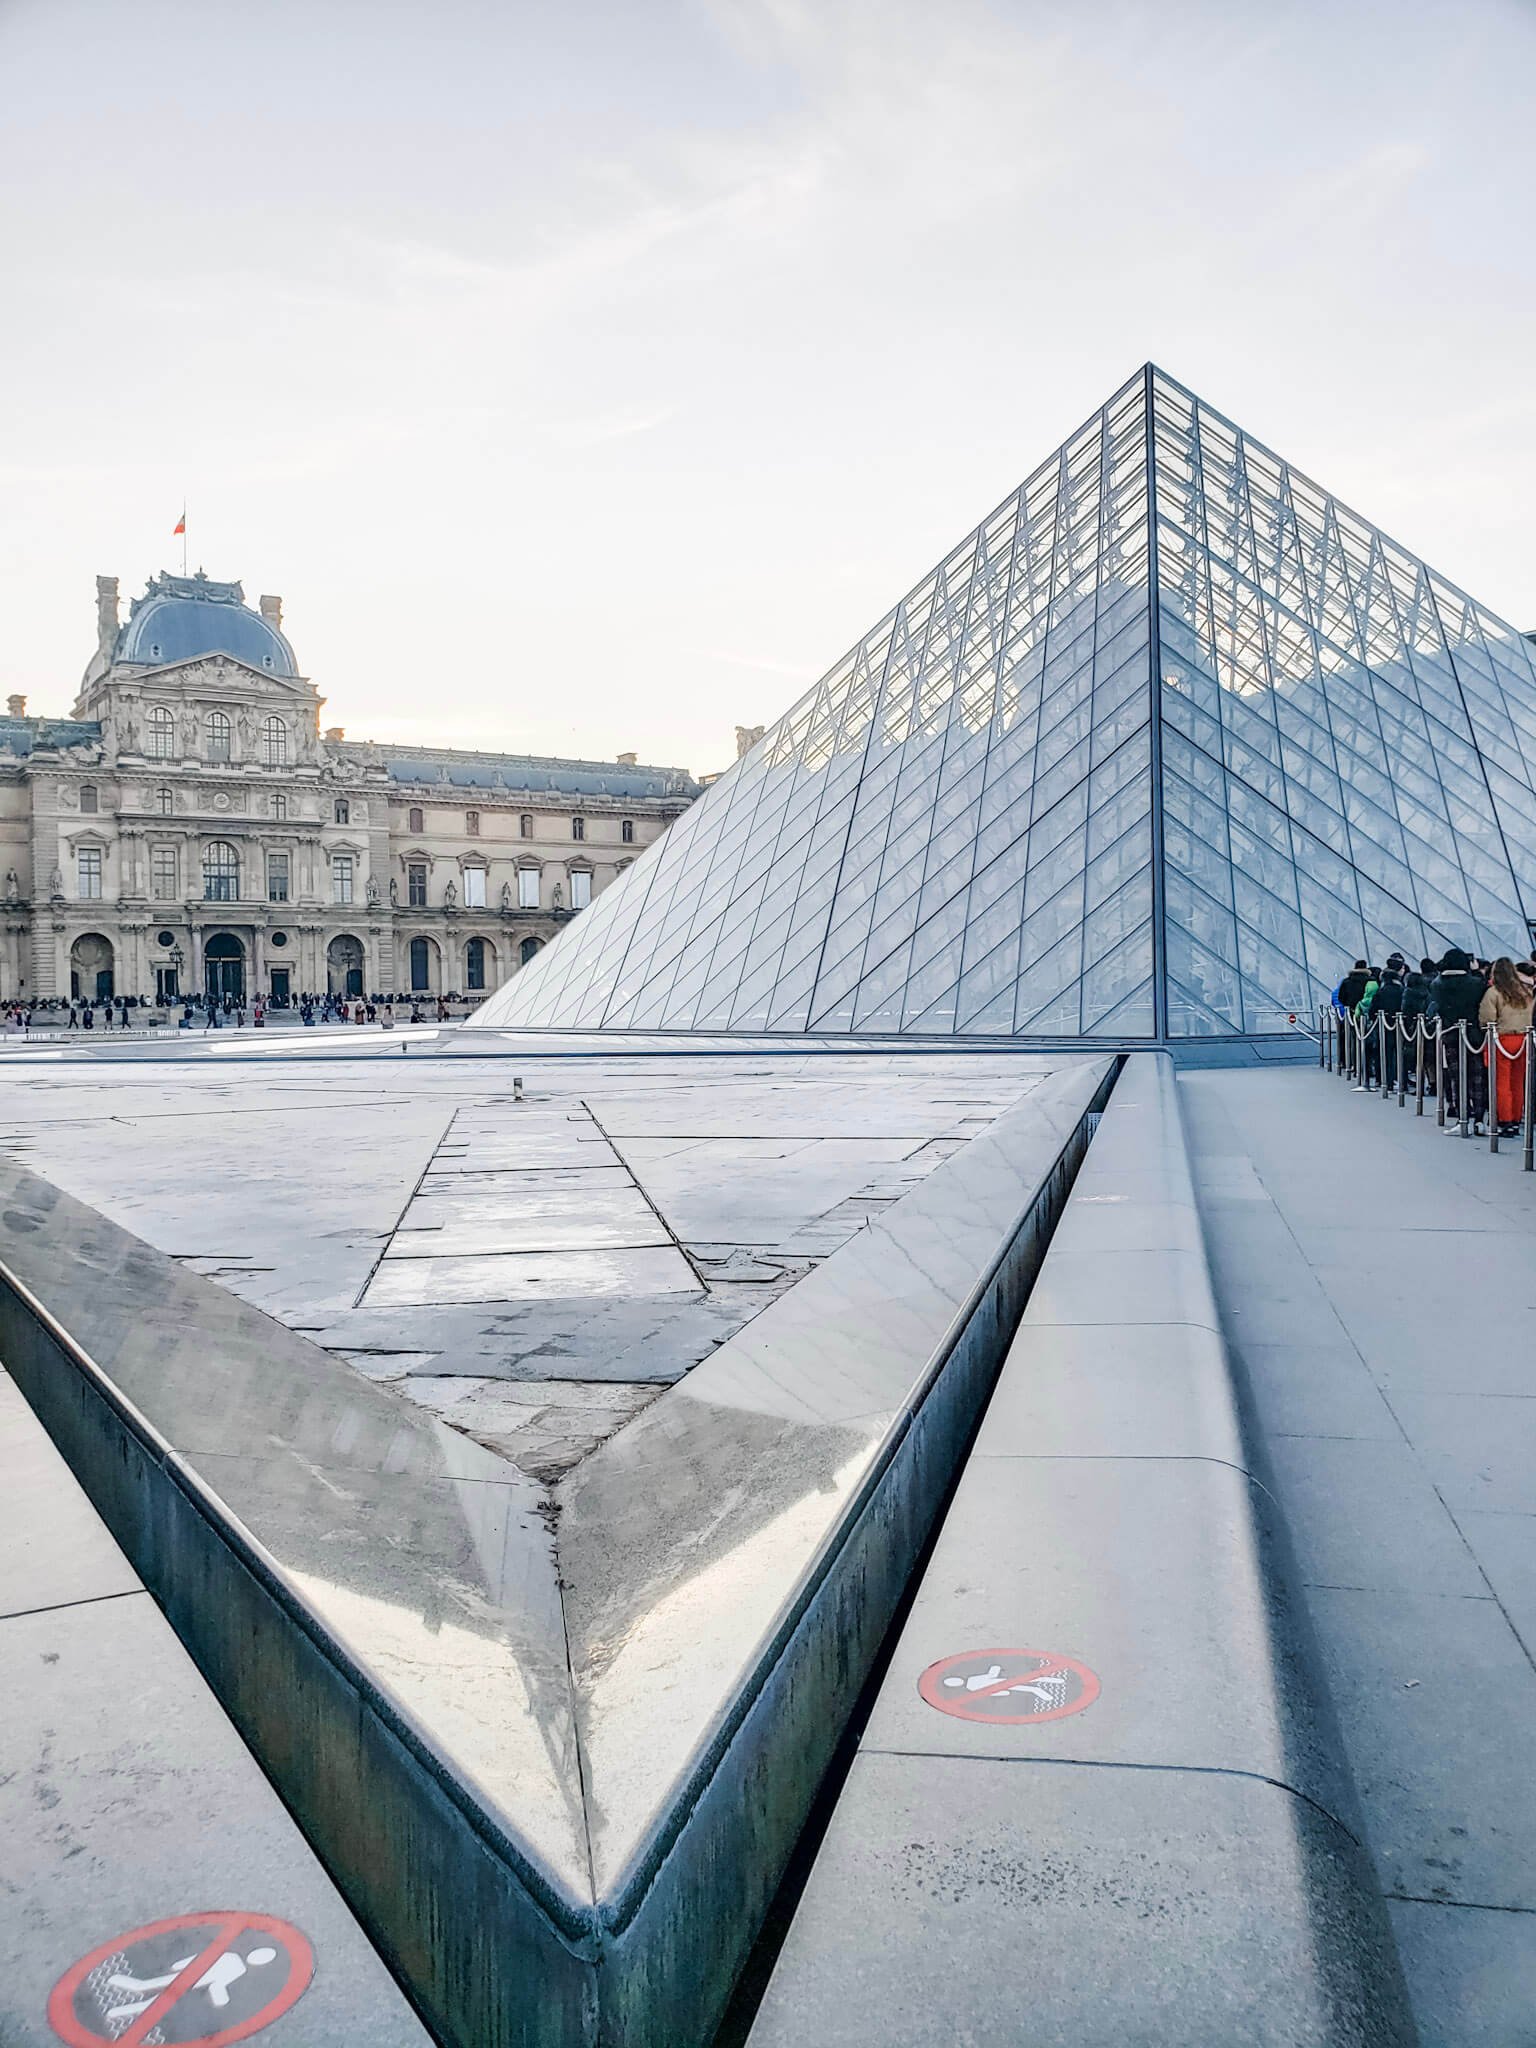 The Louvre Pyramid Entrance